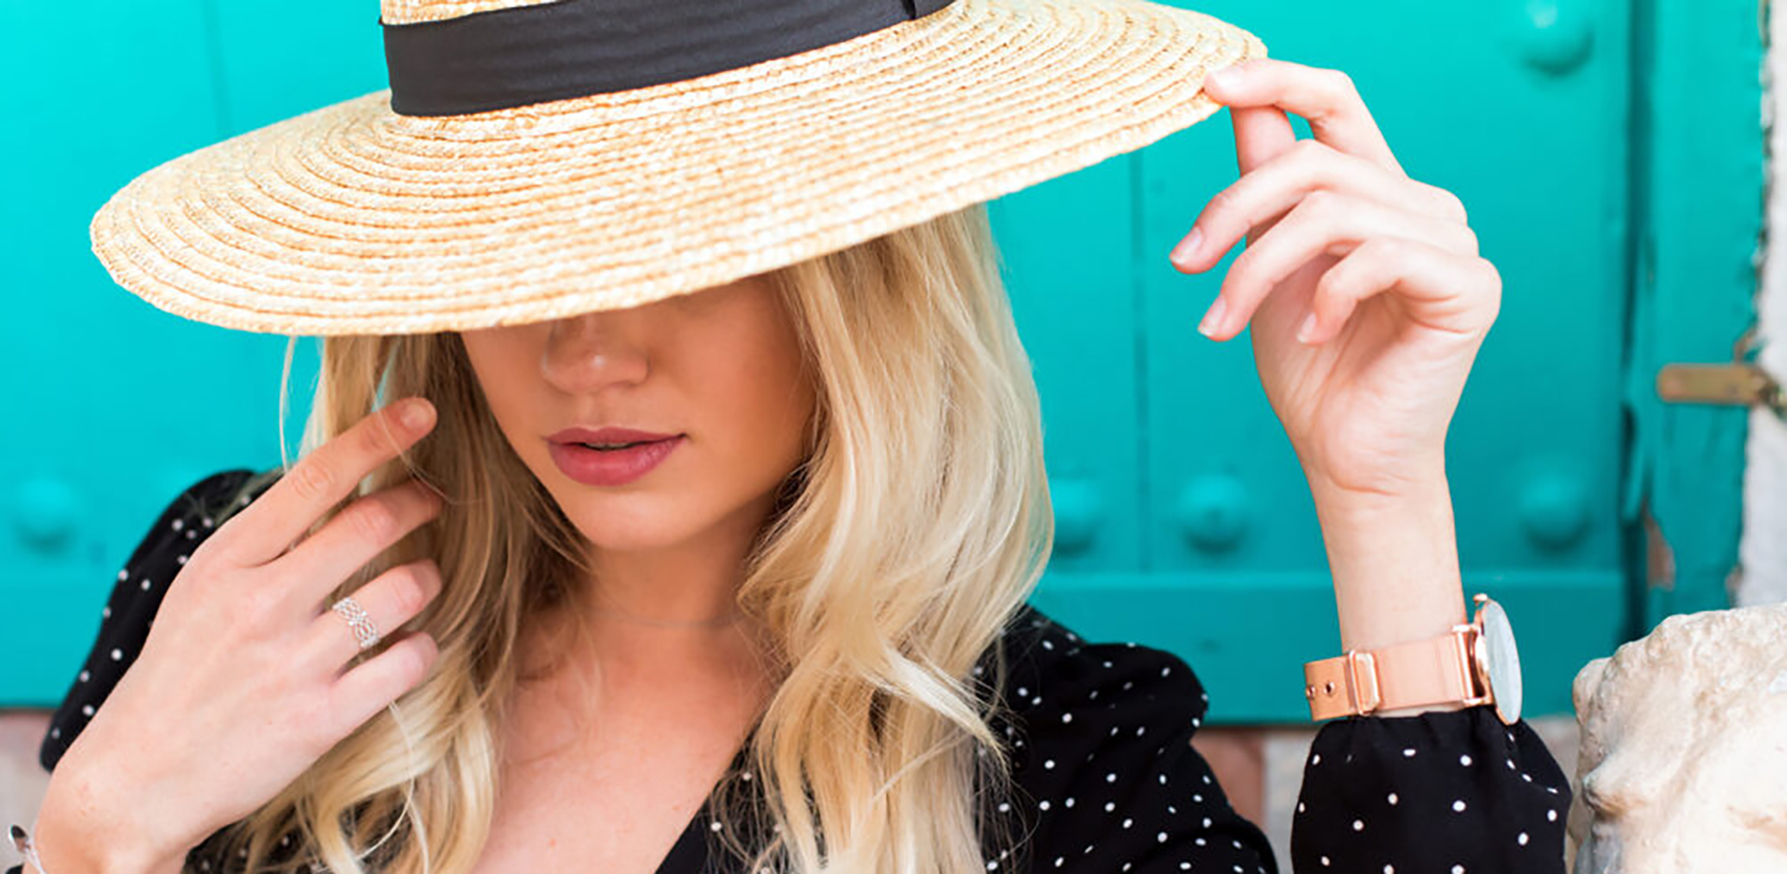 how-to-dye-your-hair-and-keep-it-shiny-woman-in-stylish-hat